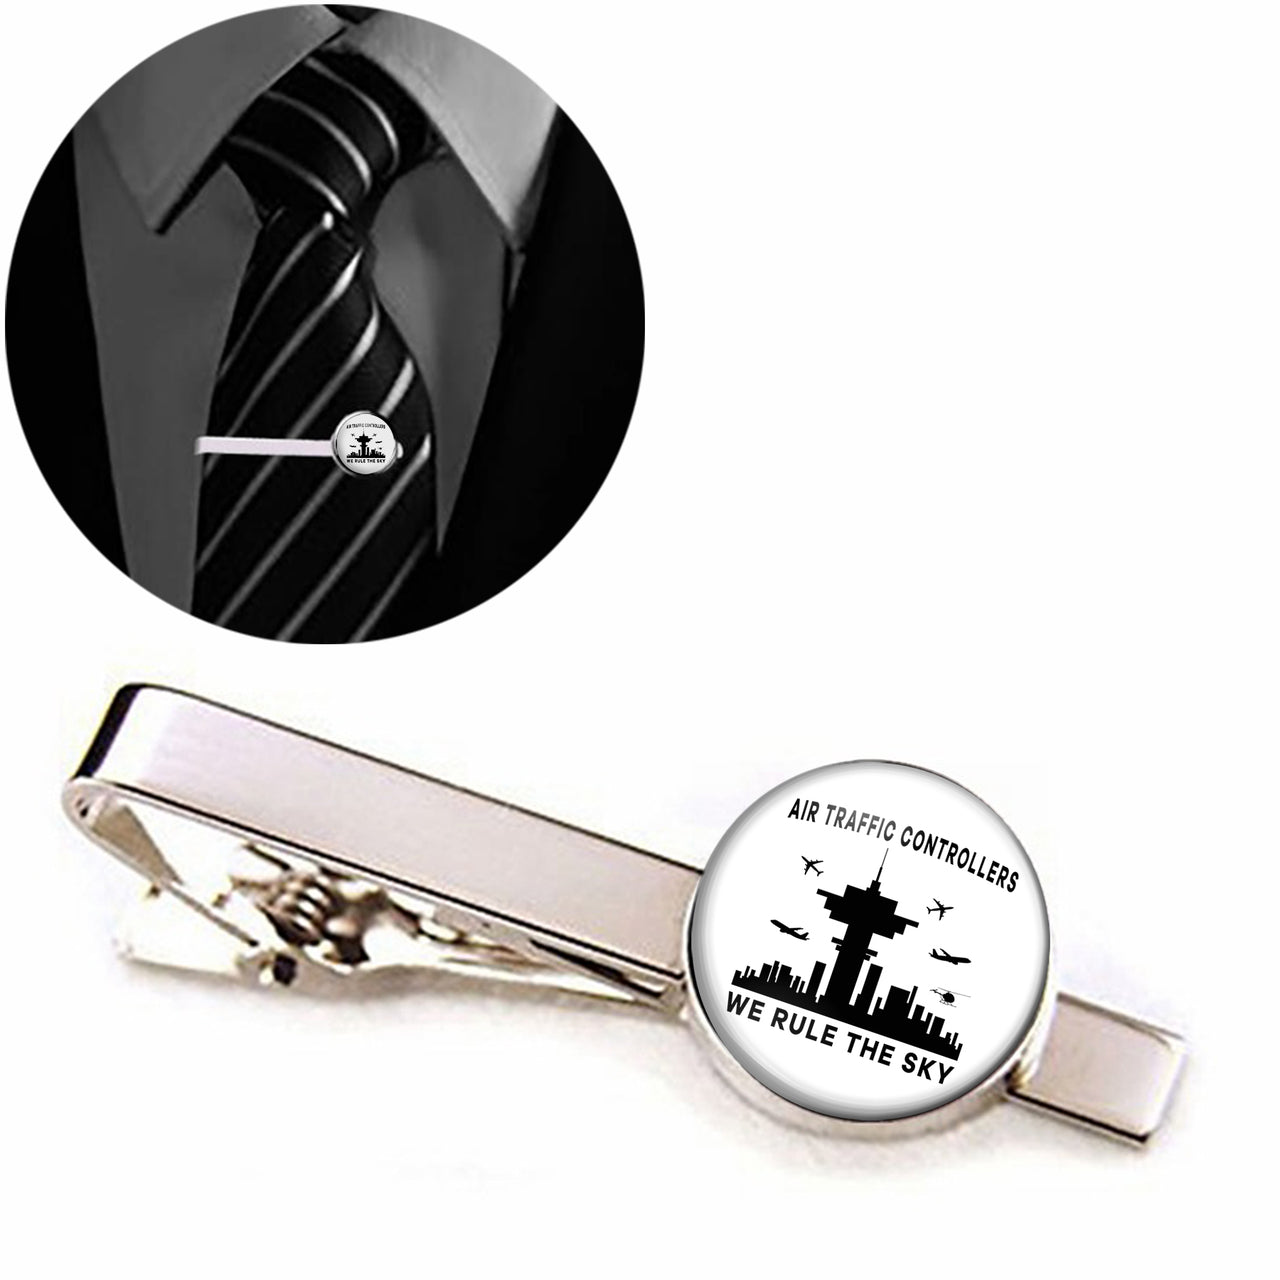 Air Traffic Controllers - We Rule The Sky Designed Tie Clips